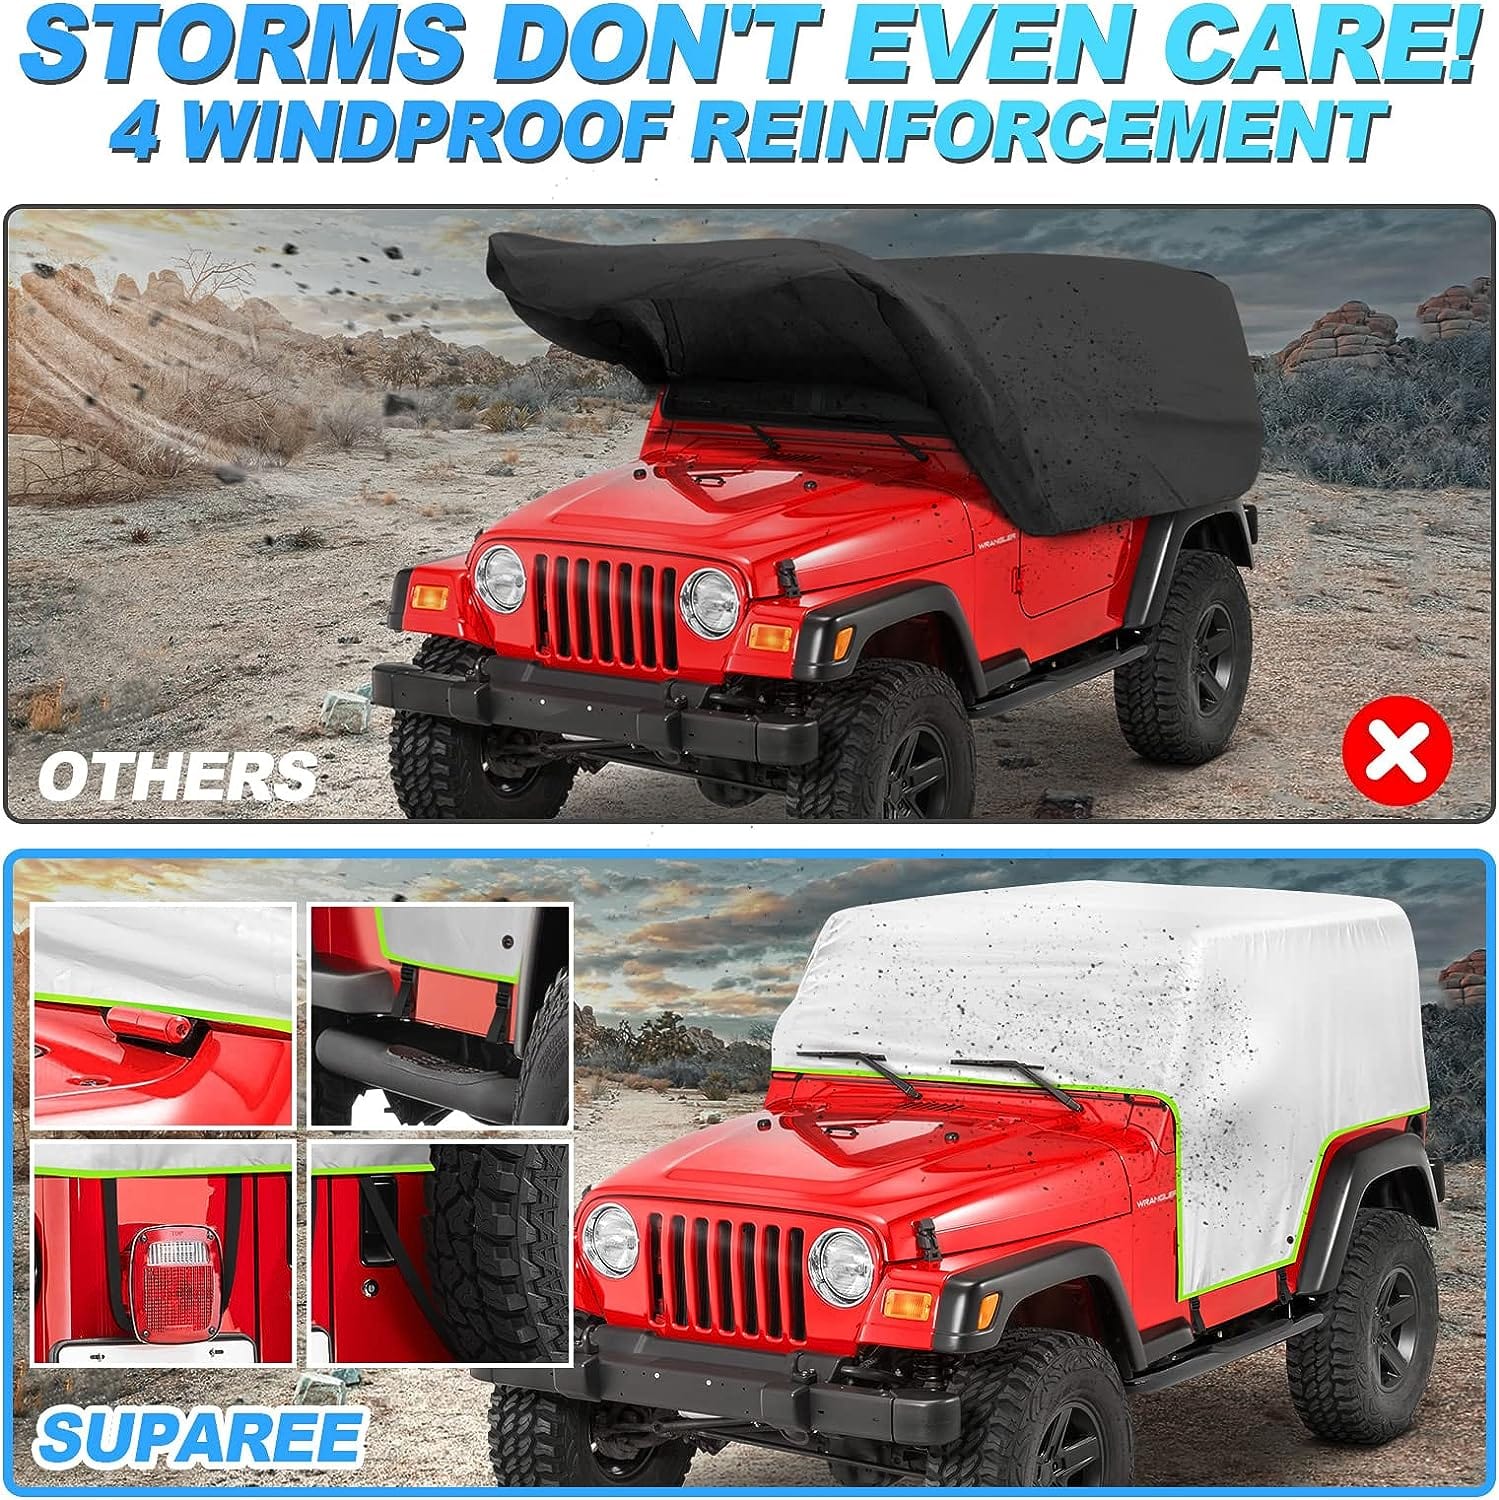 SUPAREE Jeep Cover Suparee Jeep Cab Cover Waterproof for 1992-2006 Wrangler YJ TJ 2 Door Product description